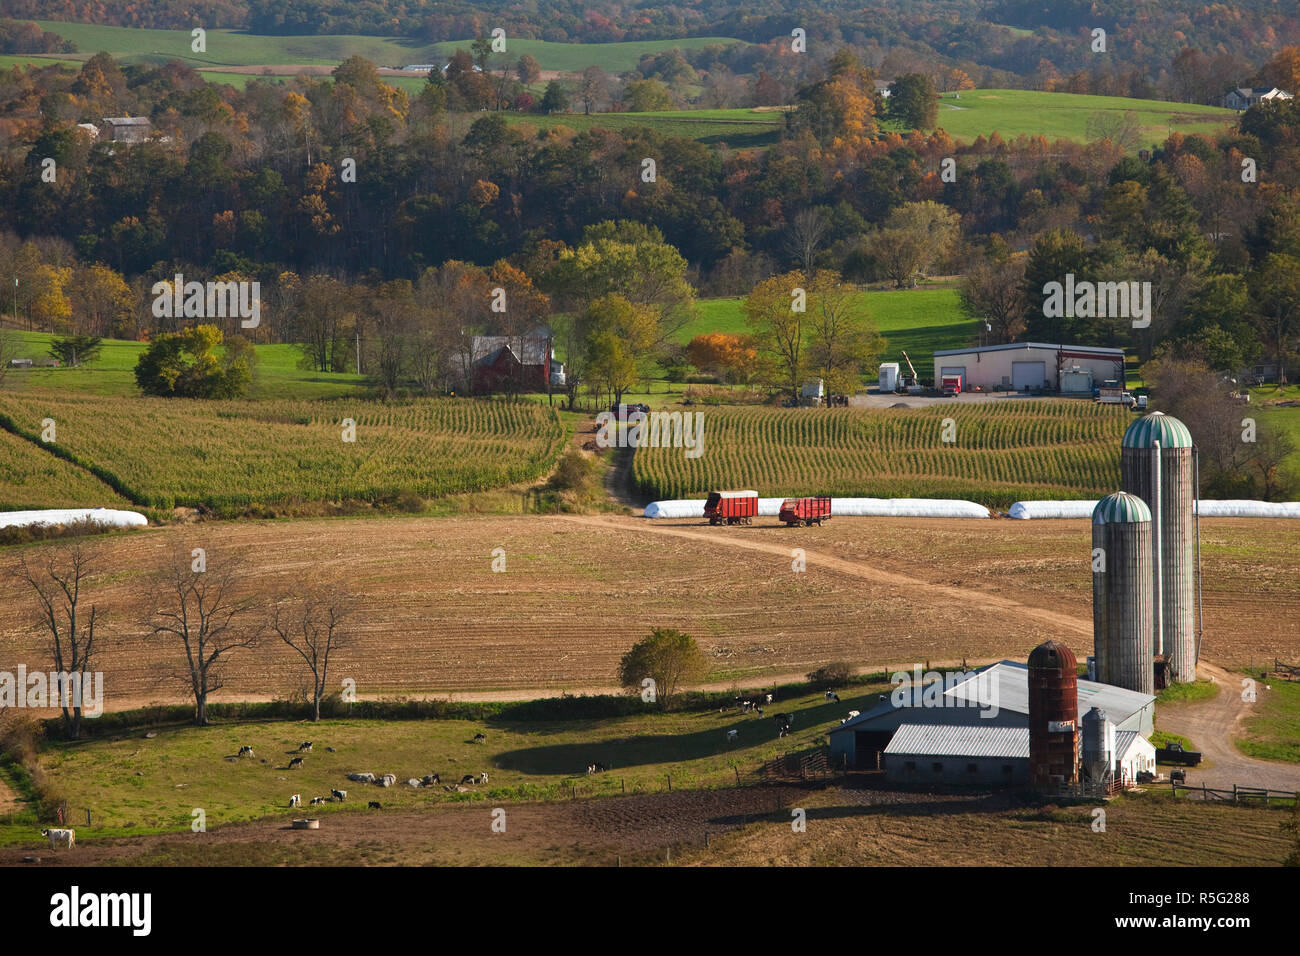 USA, West Virginia, Rennick, high angle view of farm Stock Photo